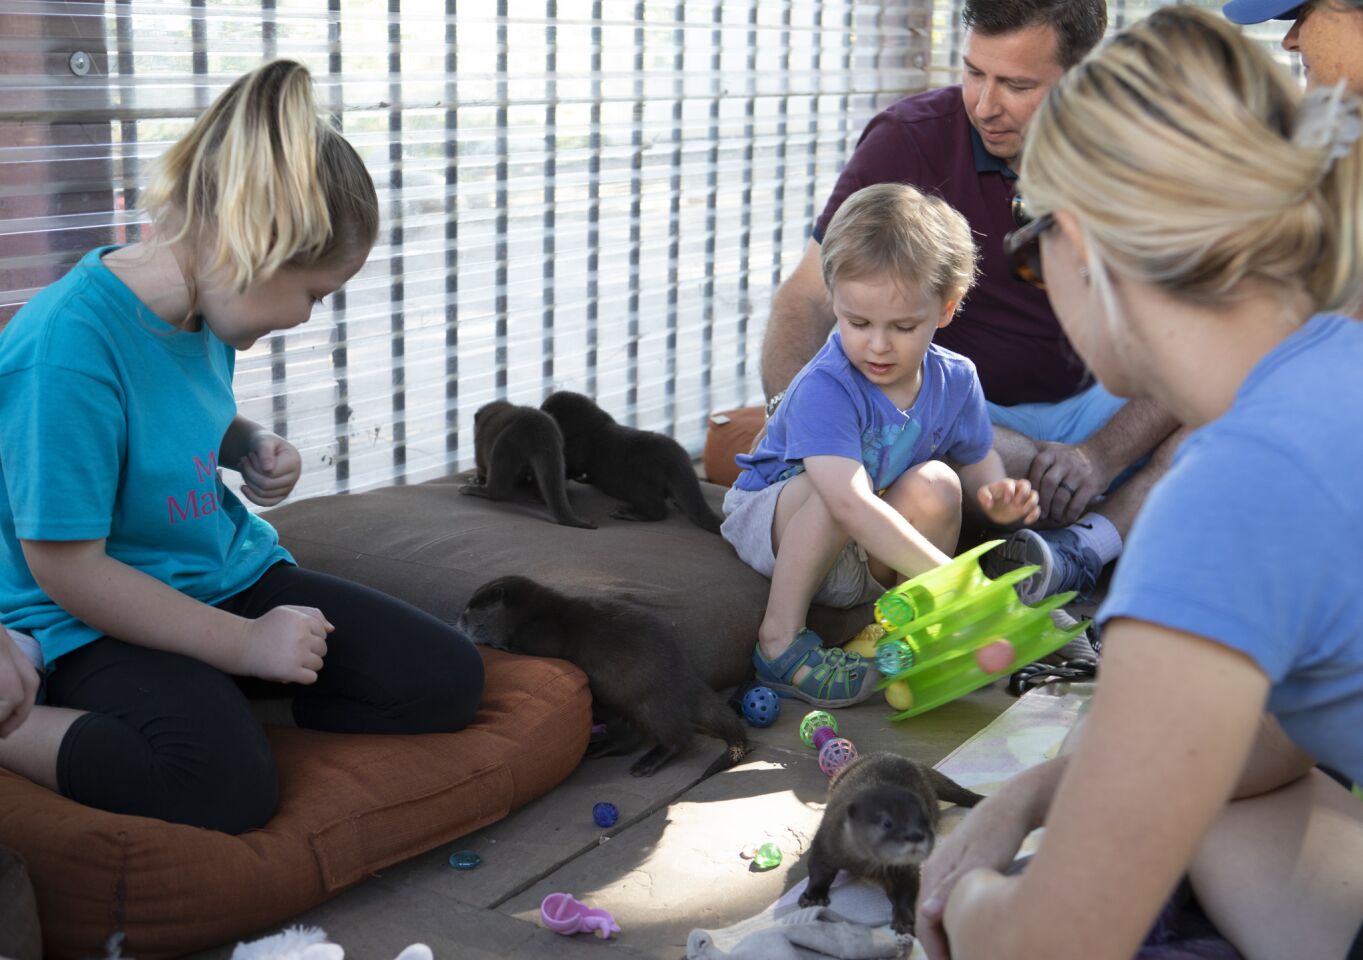 Baby otthers and Make-A-Wish kids interact at Nurtured by Nature